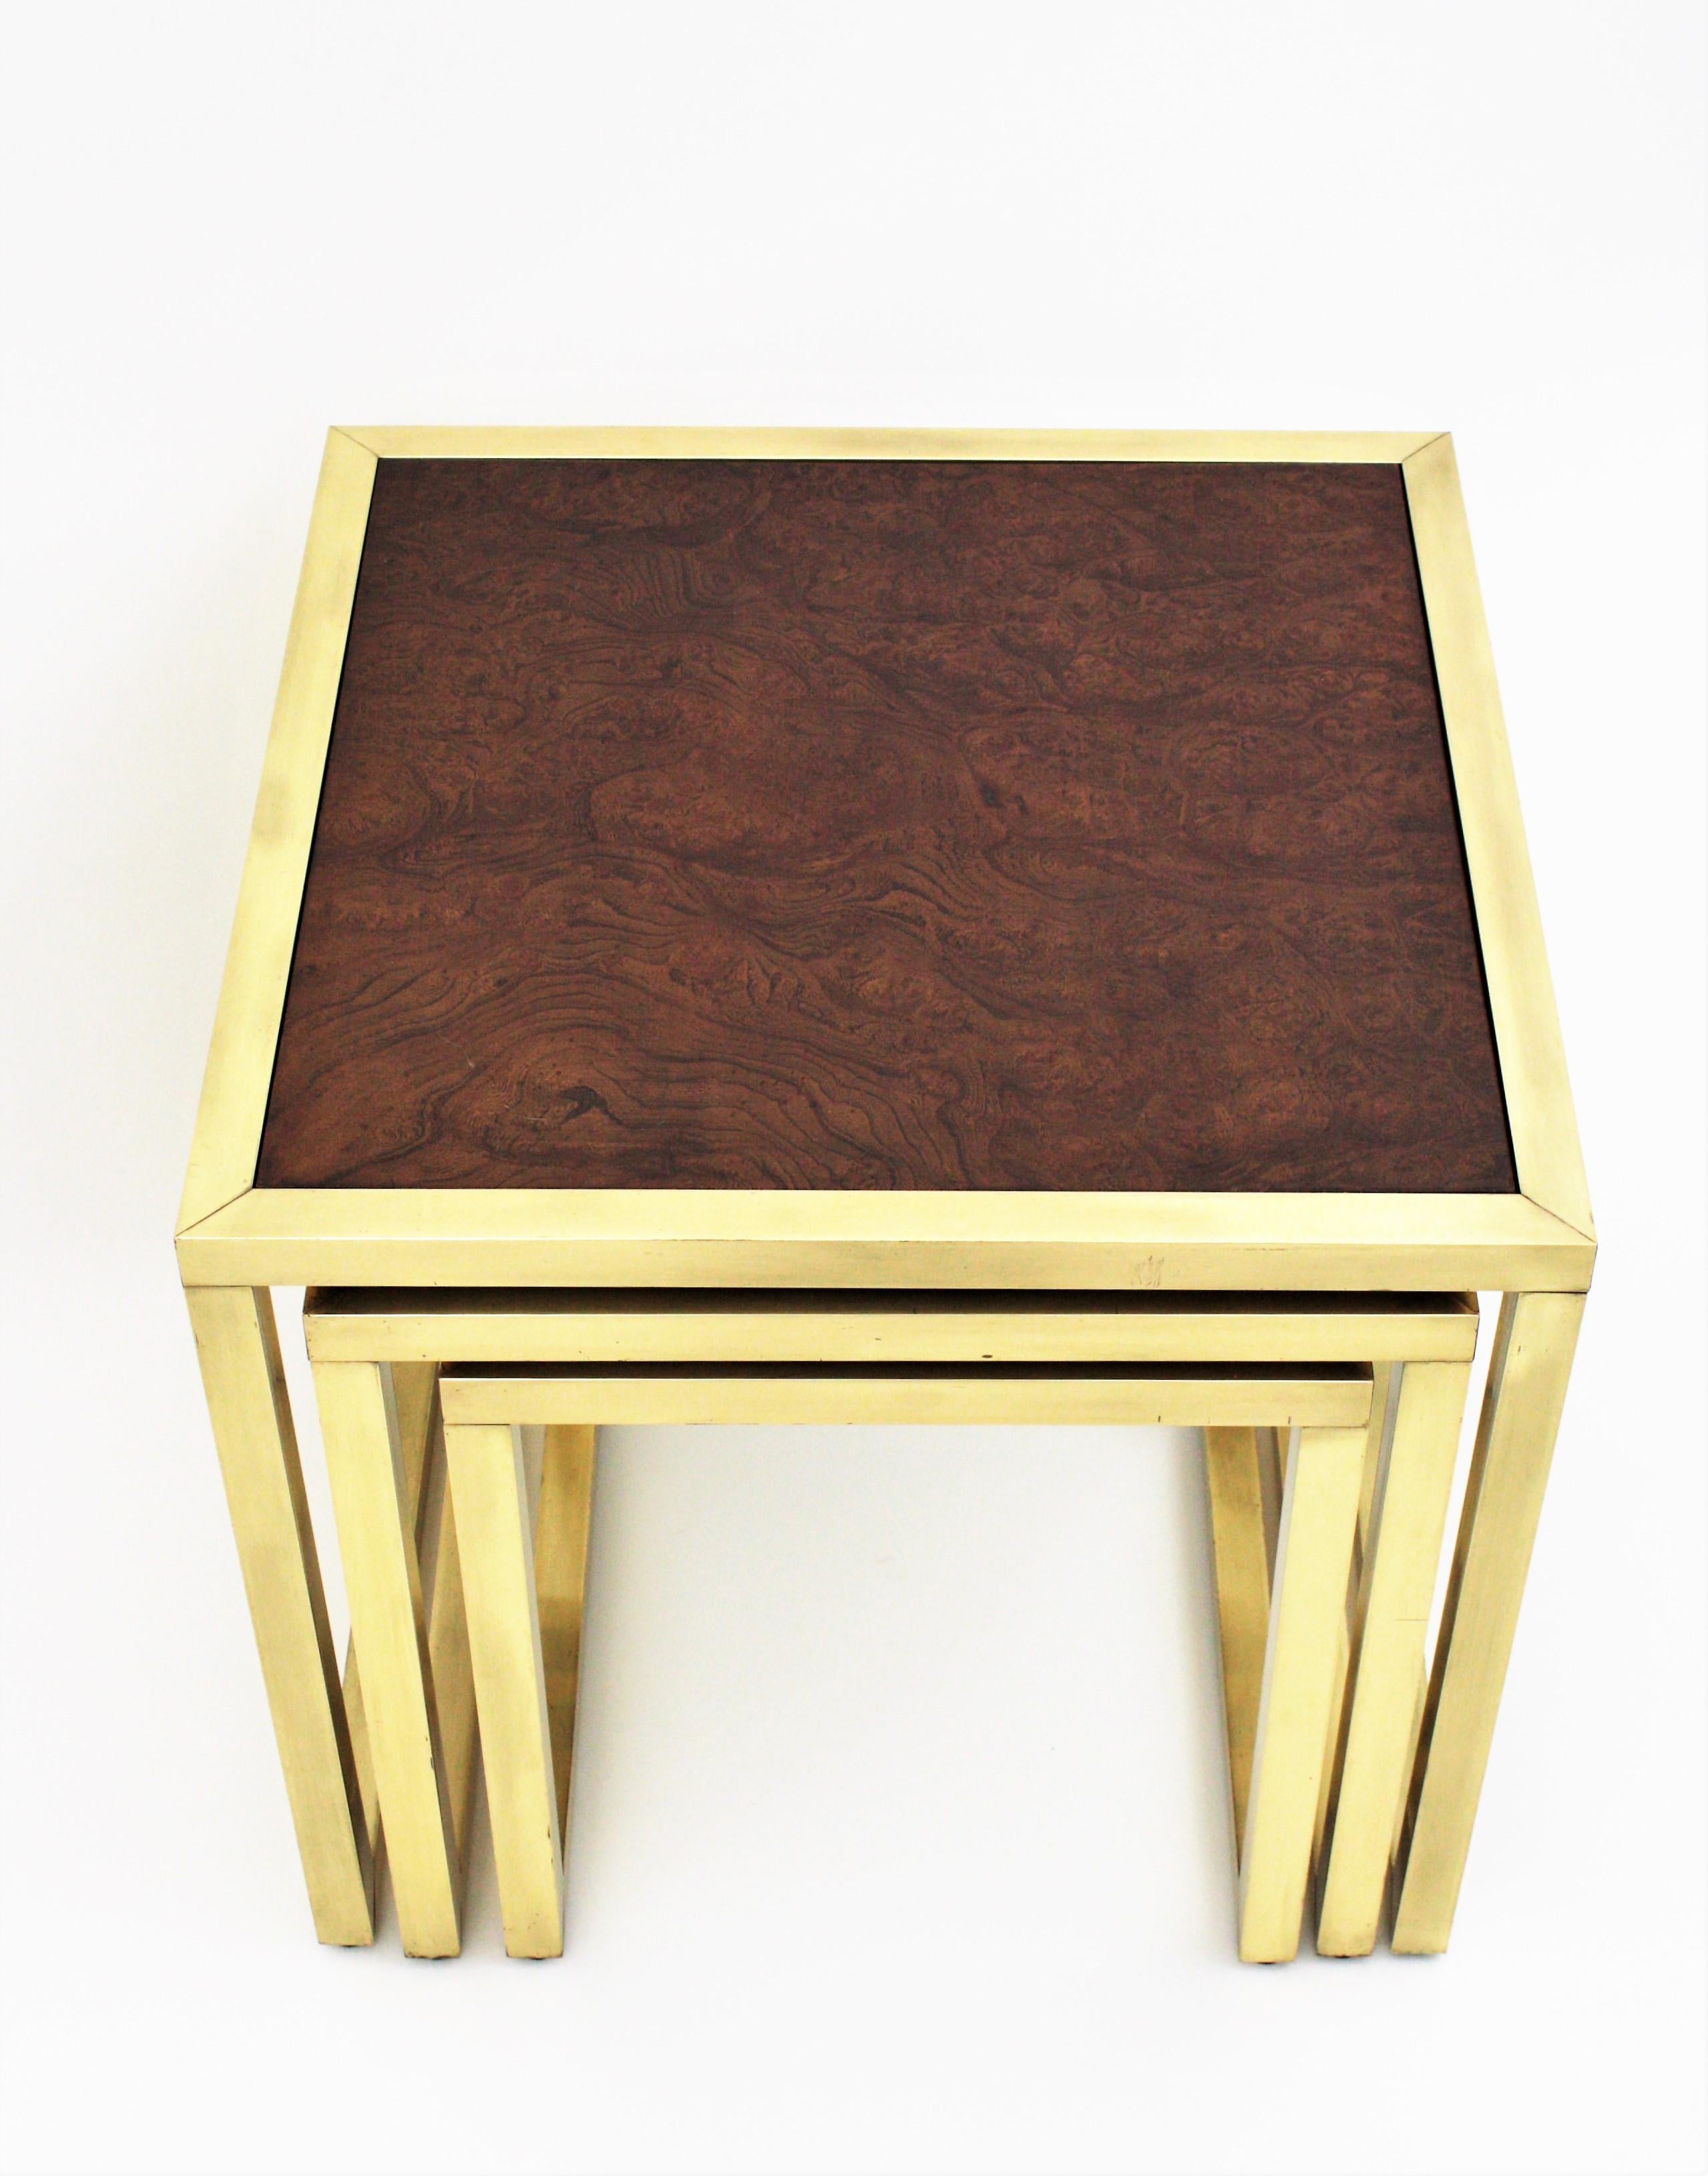 20th Century Milo Baughman Style Nesting Tables in Burl Wood and Brass  For Sale